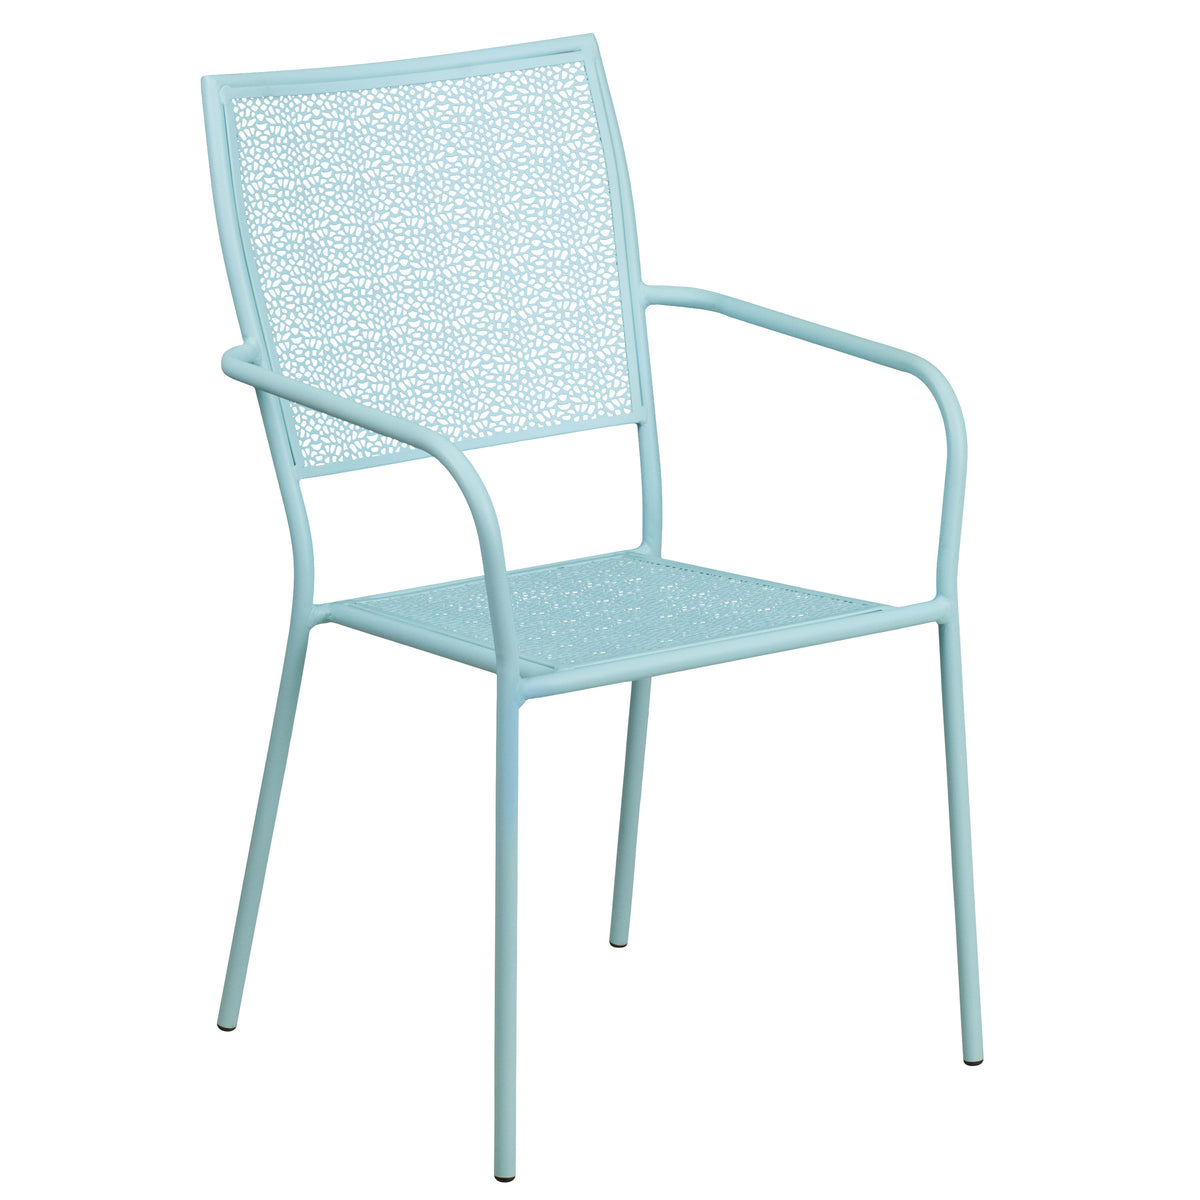 Sky Blue |#| 35.5inch SQ Sky Blue Indoor-Outdoor Steel Patio Table Set w/ 4 Square Back Chairs